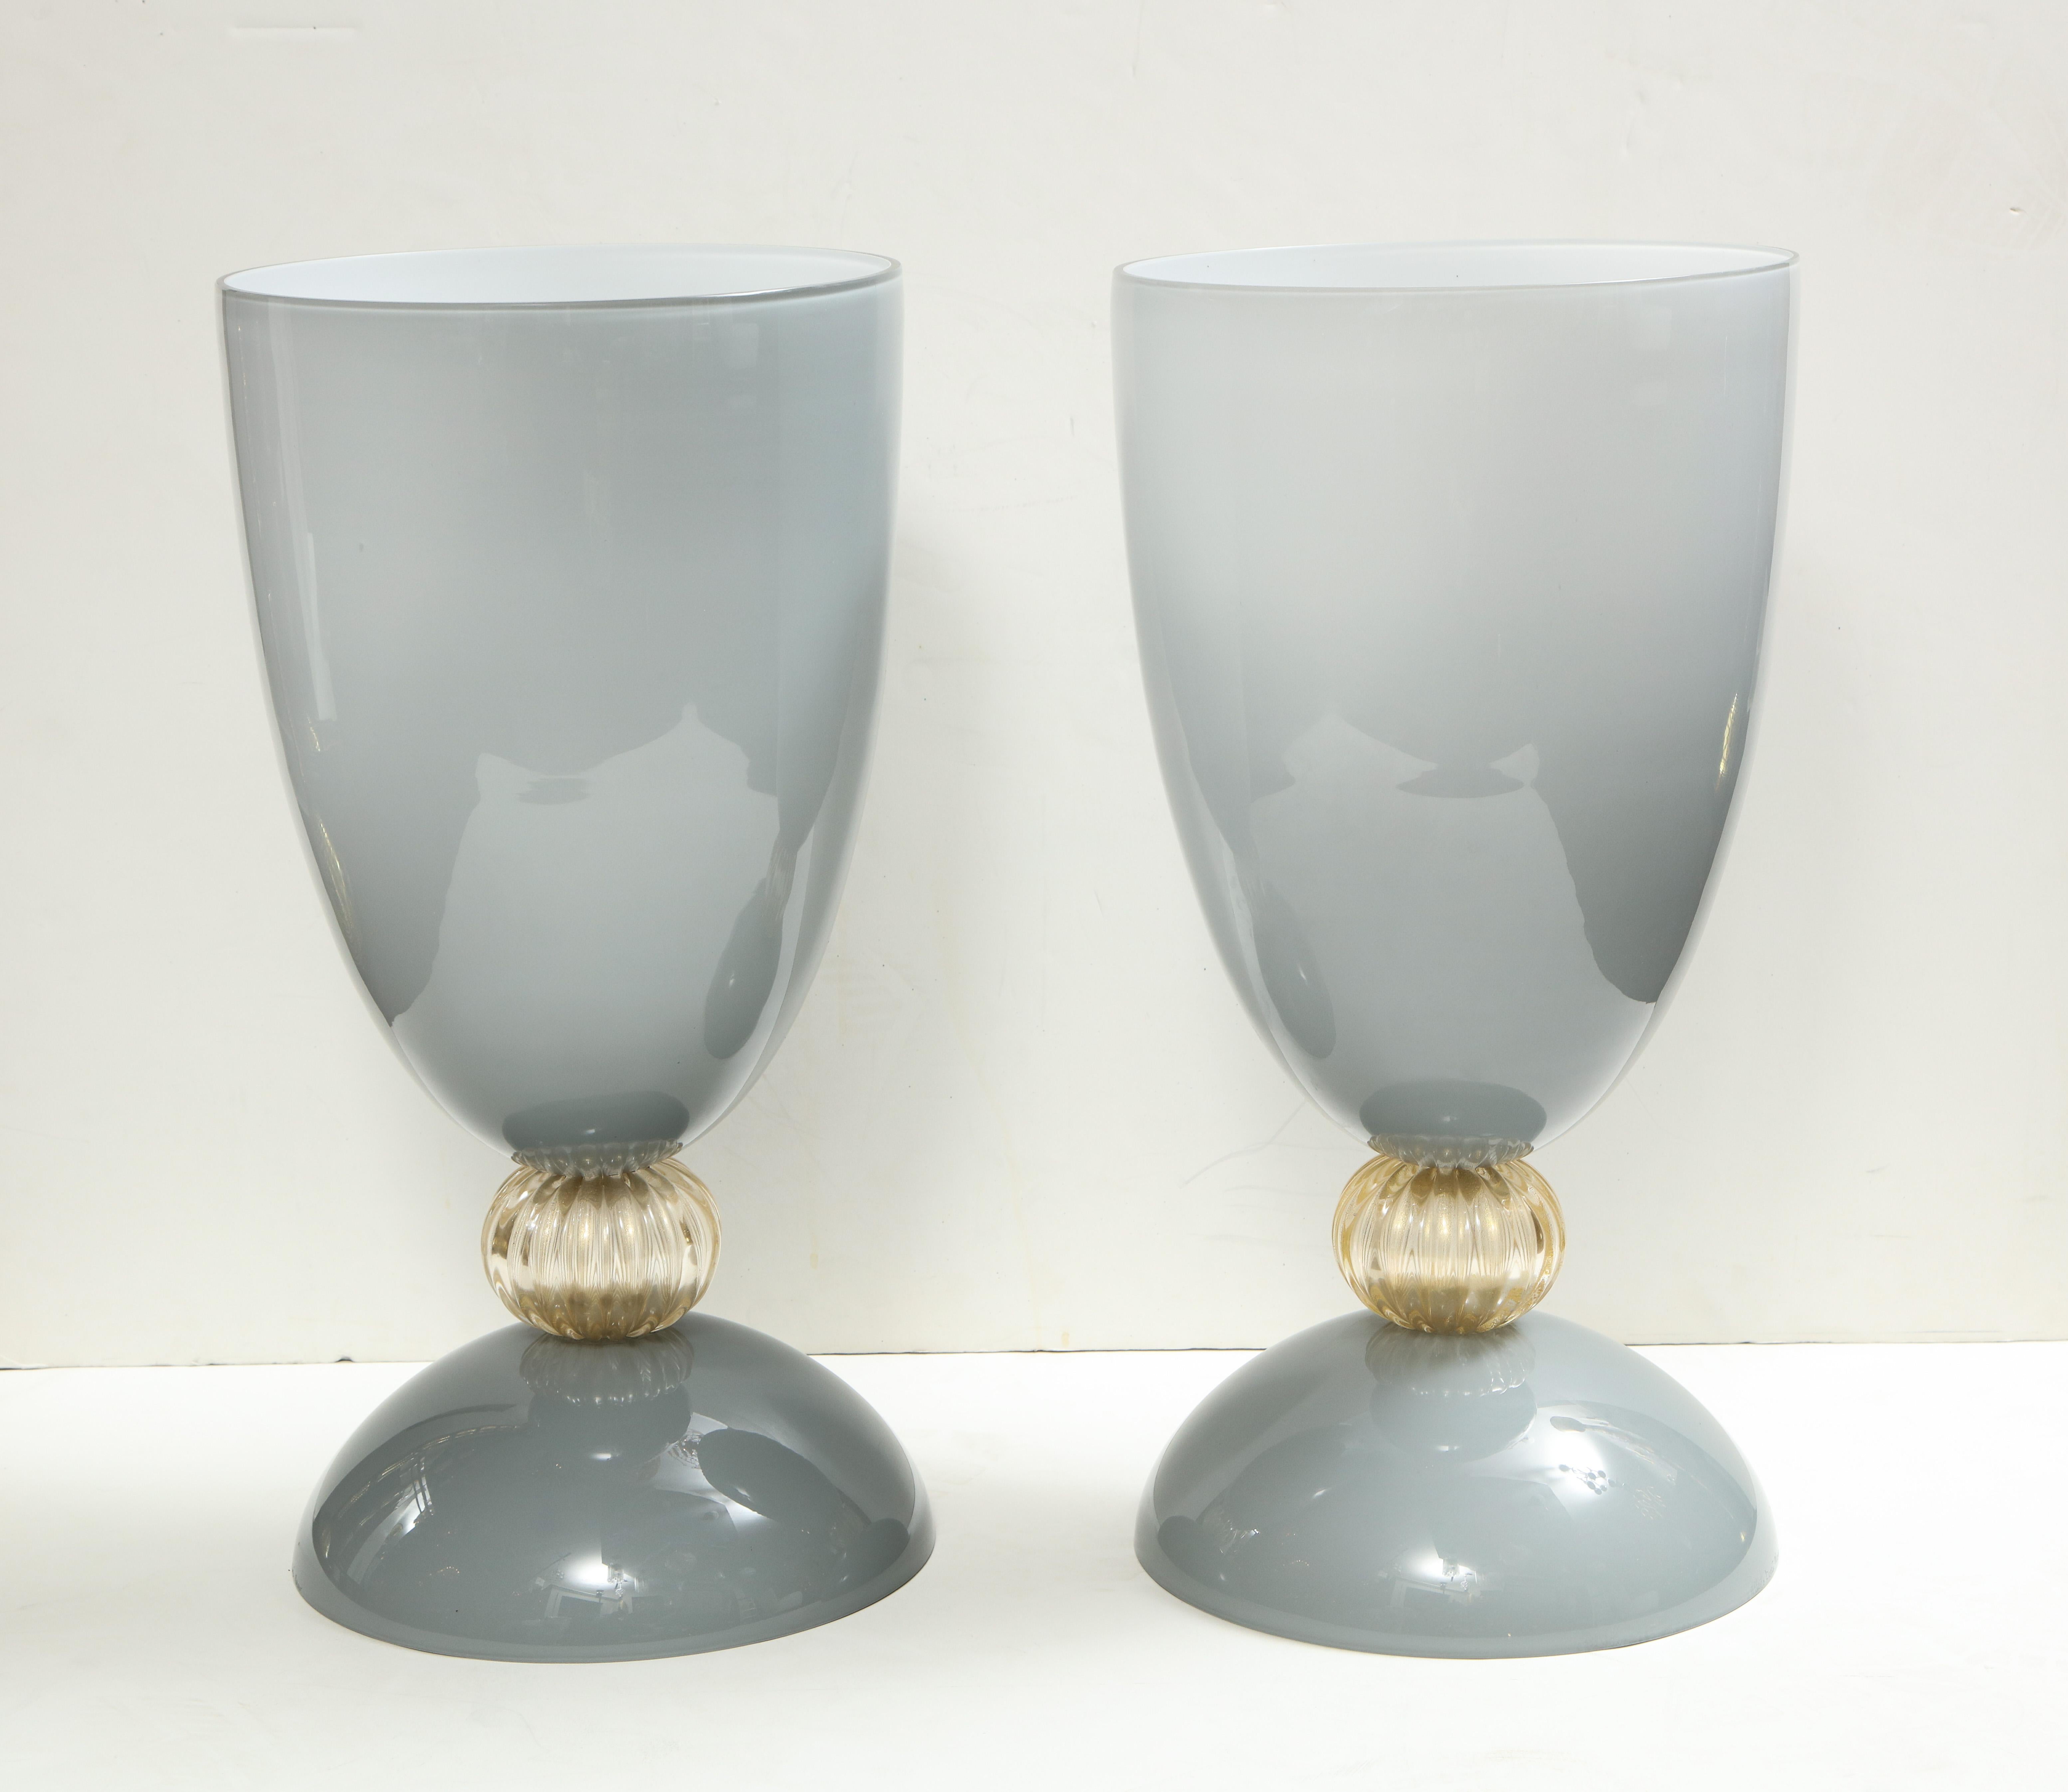 Beautiful pair of over-sized gray incamiciato Murano glass vases accented with gold aventurina glass ball.